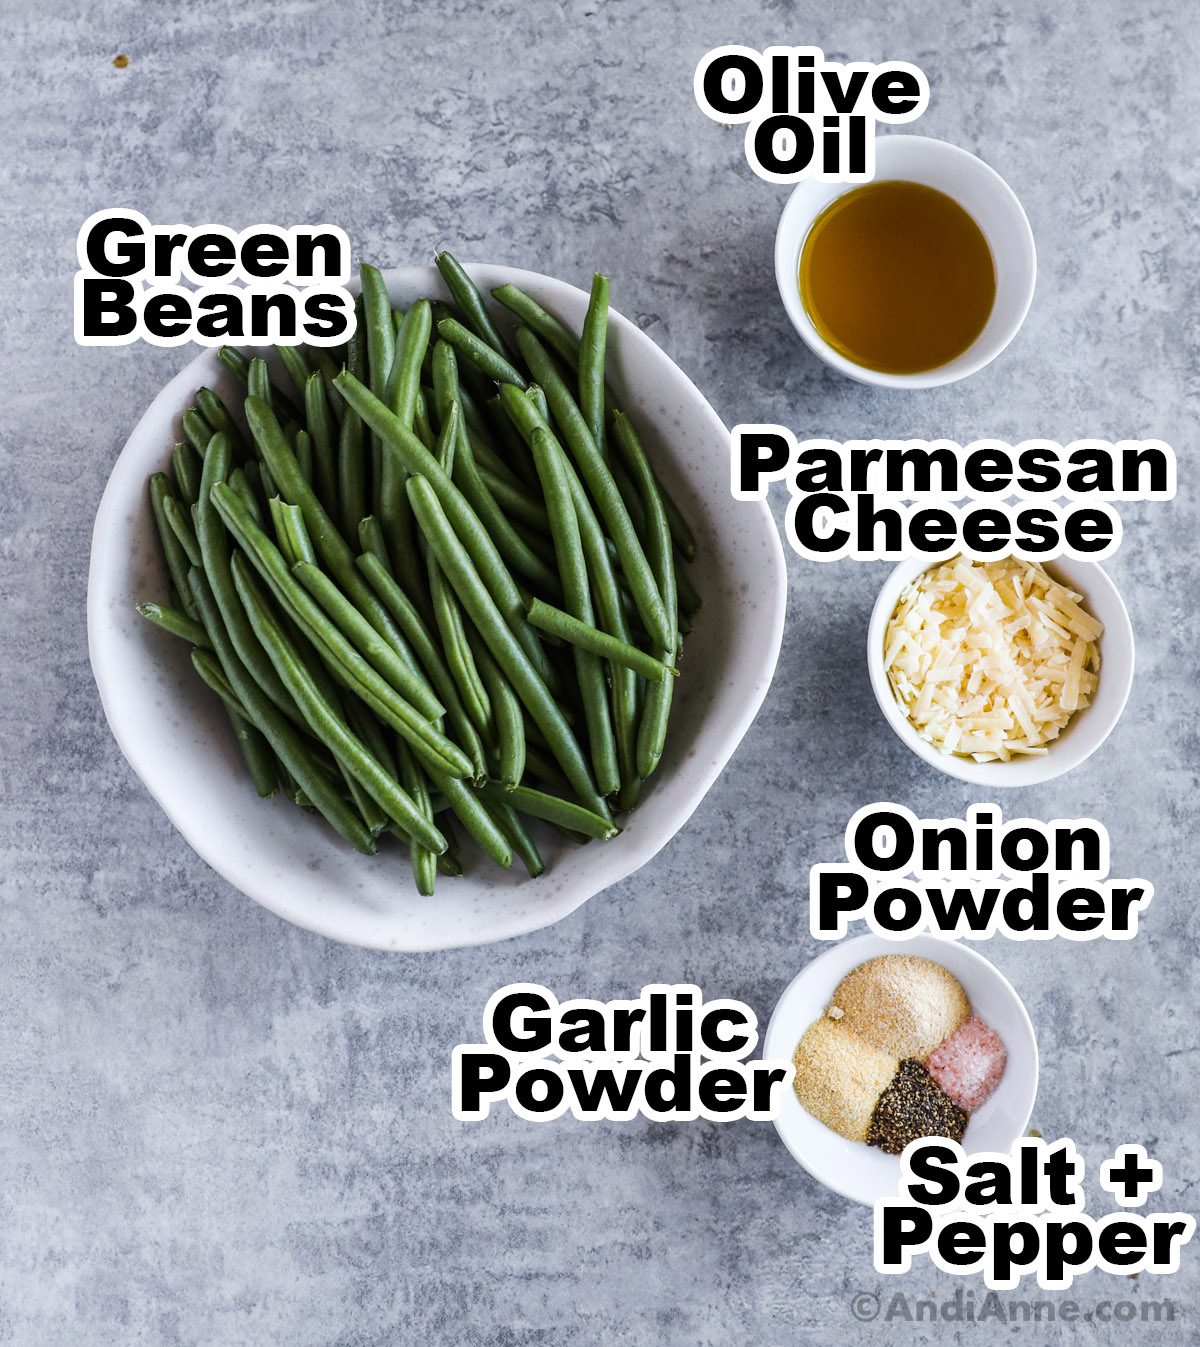 Recipe ingredients including bowl of fresh green beans, small bowls of olive oil, grated parmesan cheese, onion powder, garlic powder, salt and pepper.